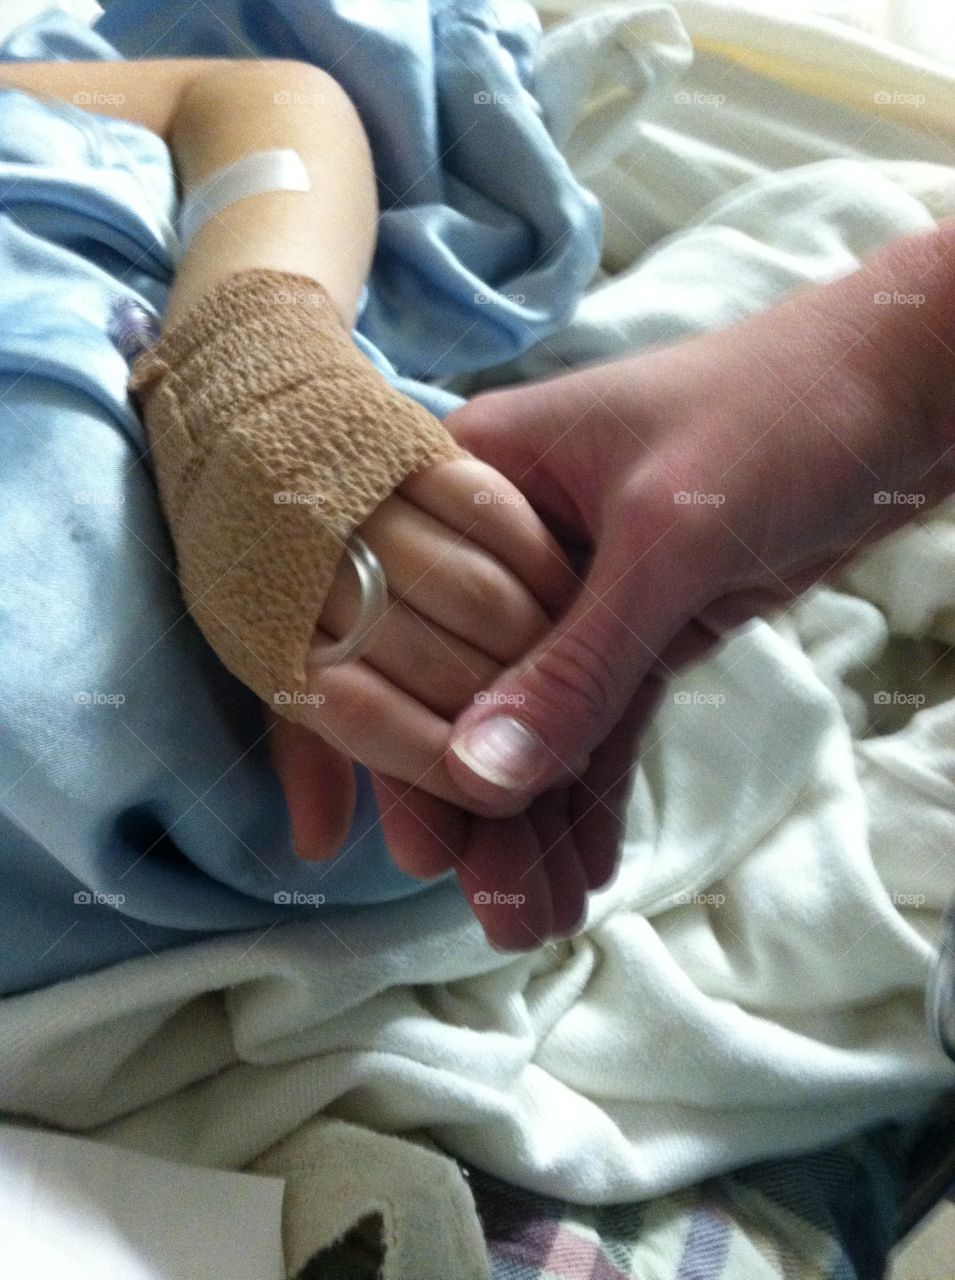 Holding my childs hand after surgery